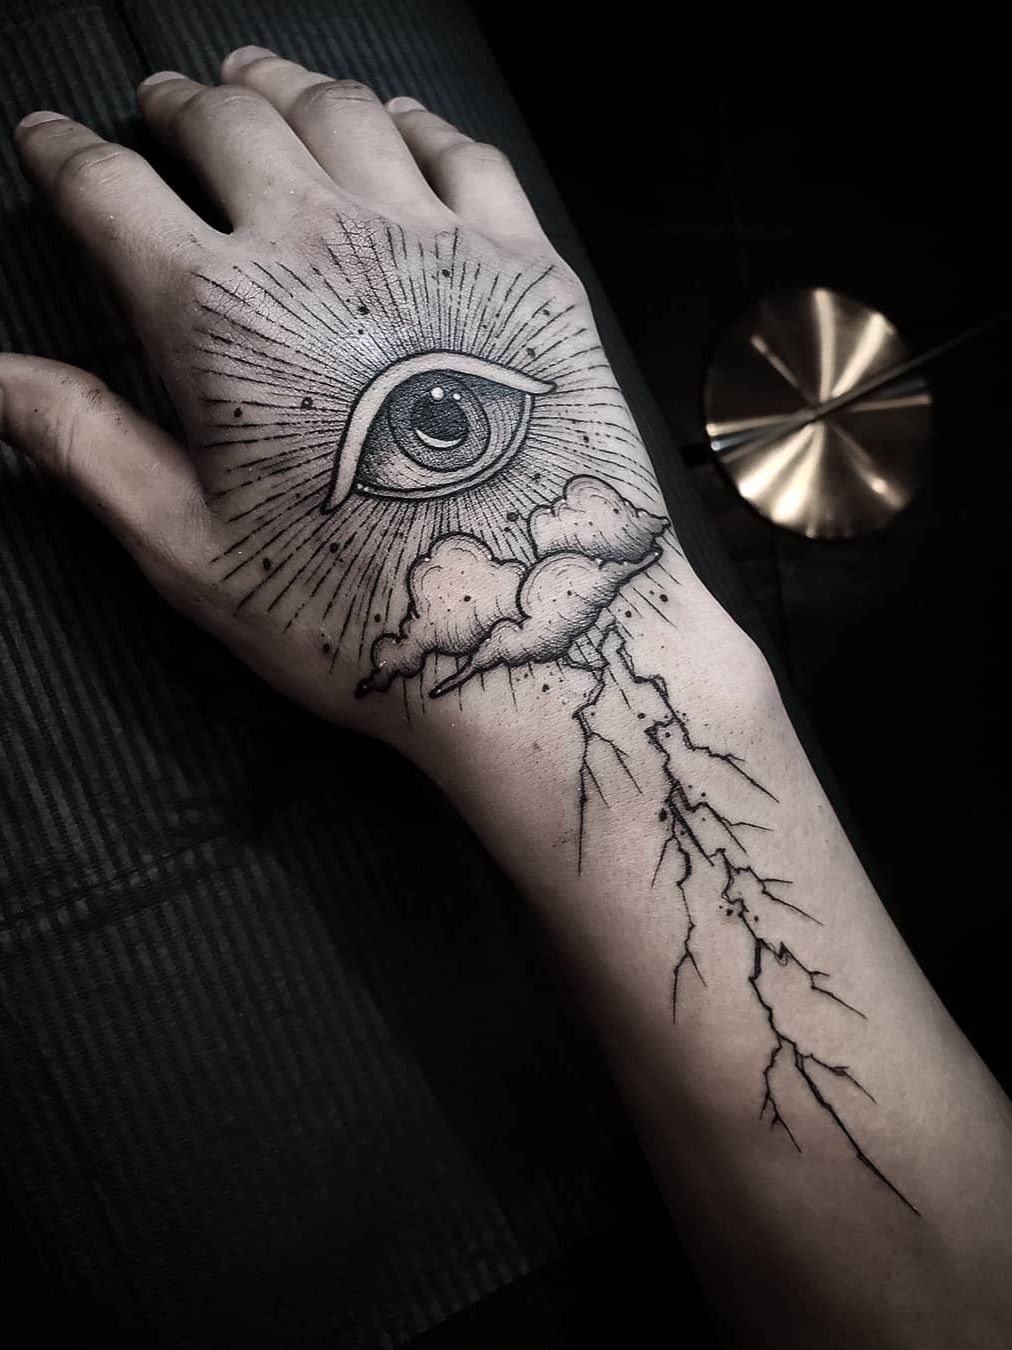 Eye Tattoos Are Creepy, Weird, And Real